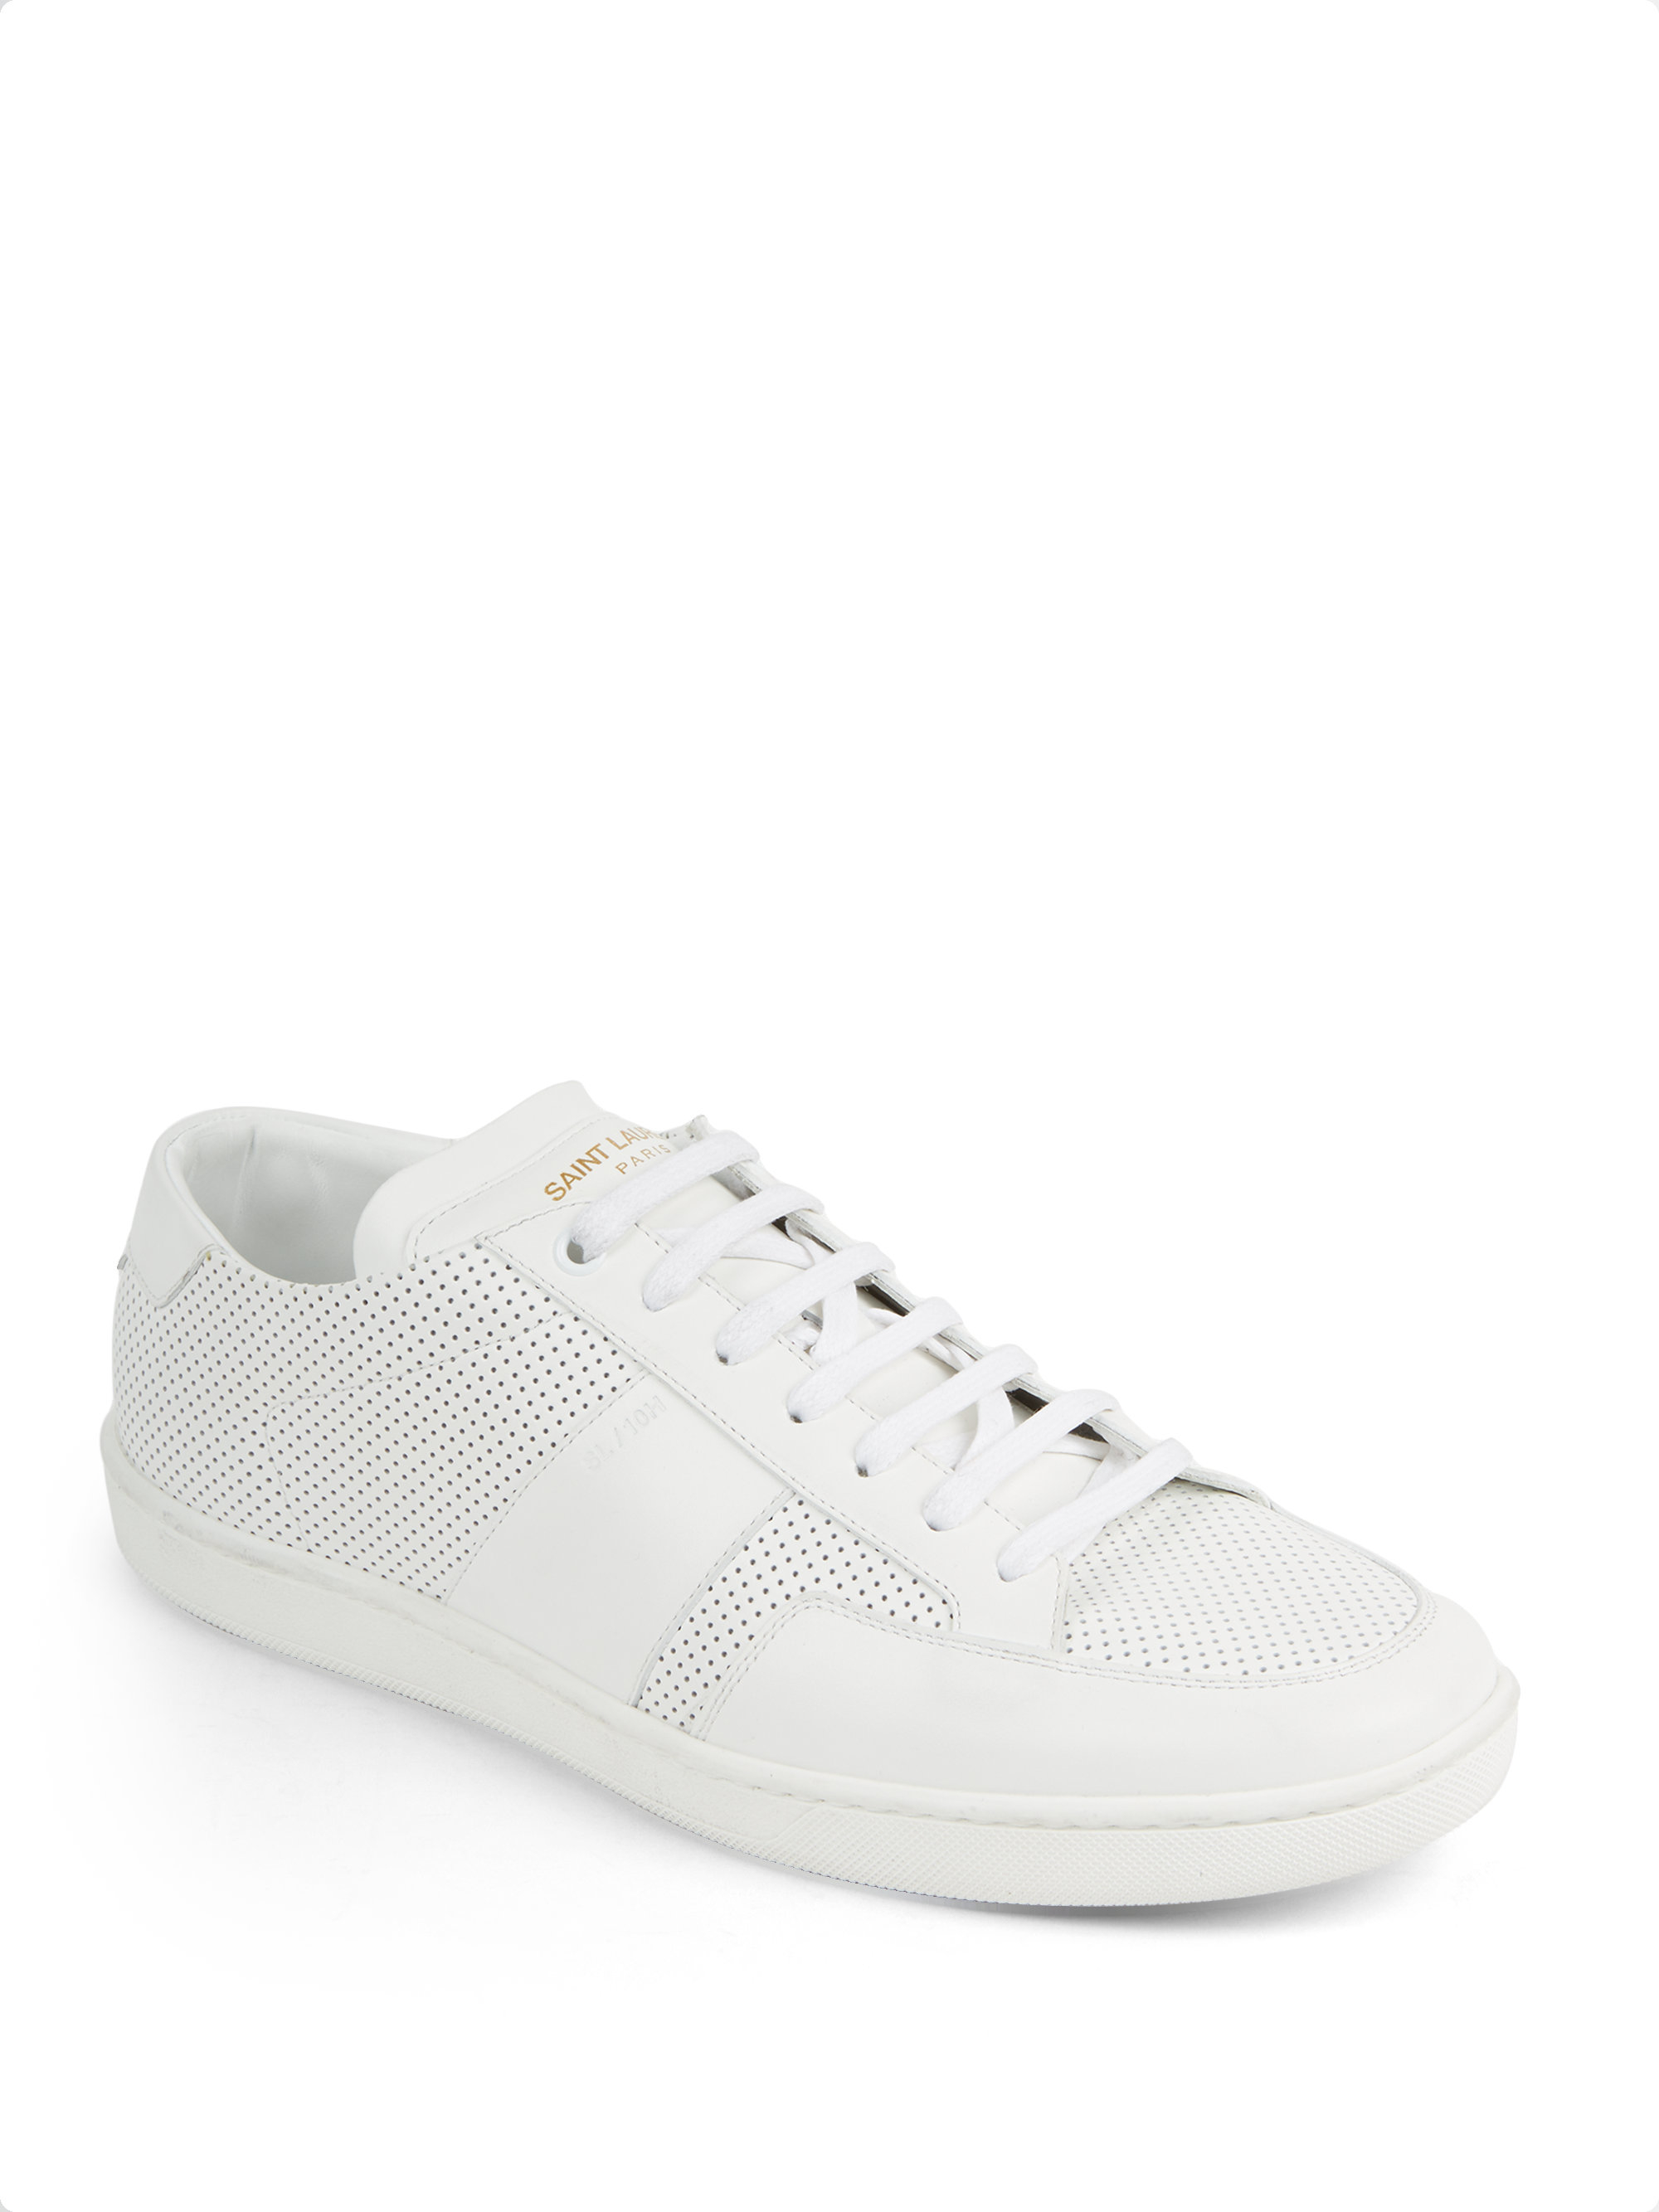 Lyst - Saint laurent Tonal Perforated Leather Sneakers in White for Men